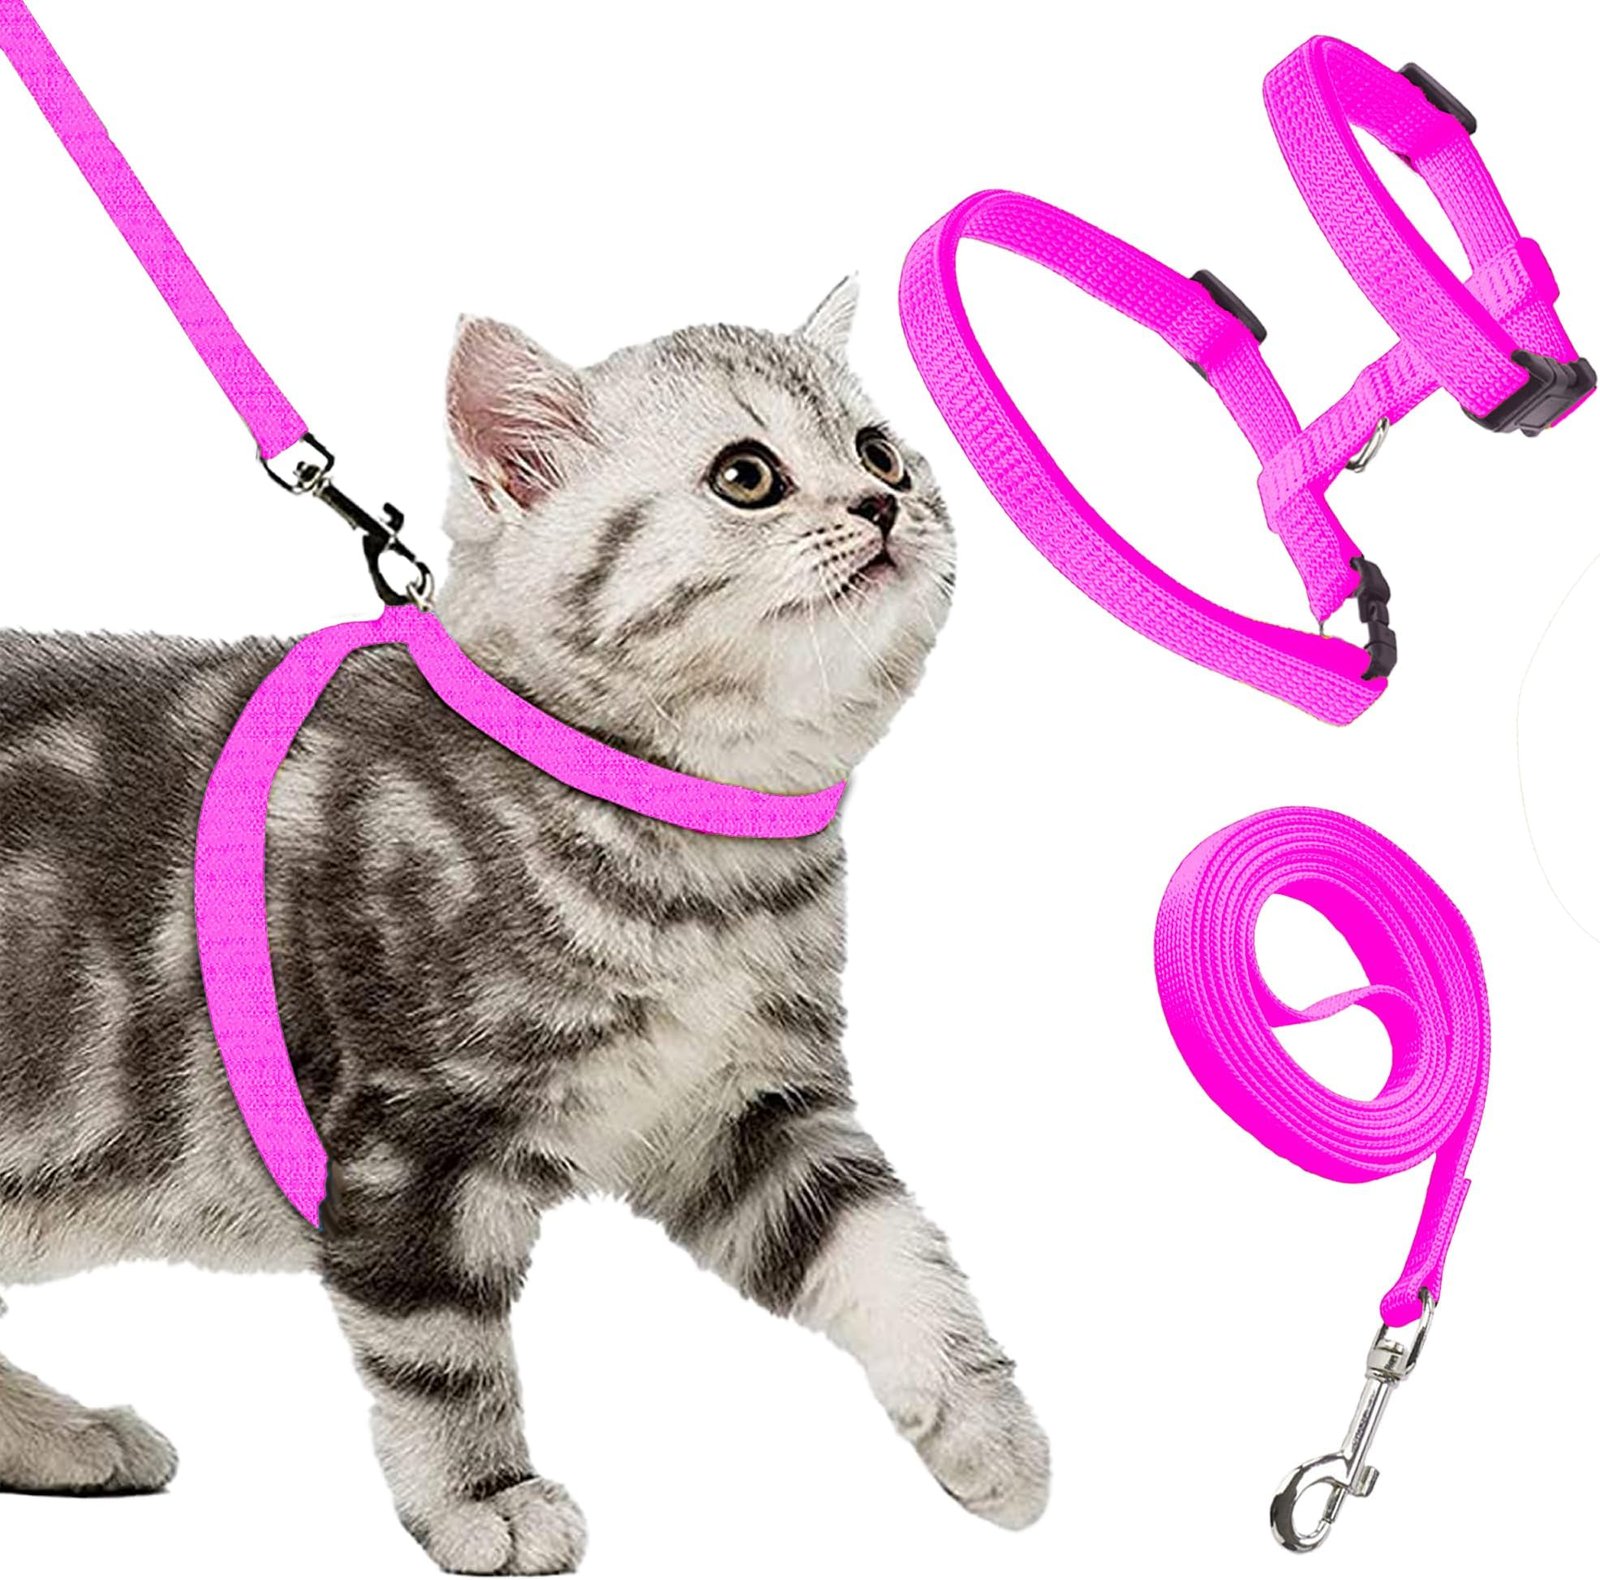 Discover the Perfect Cat Harness with Leash Set for Safe Outdoor Adventures